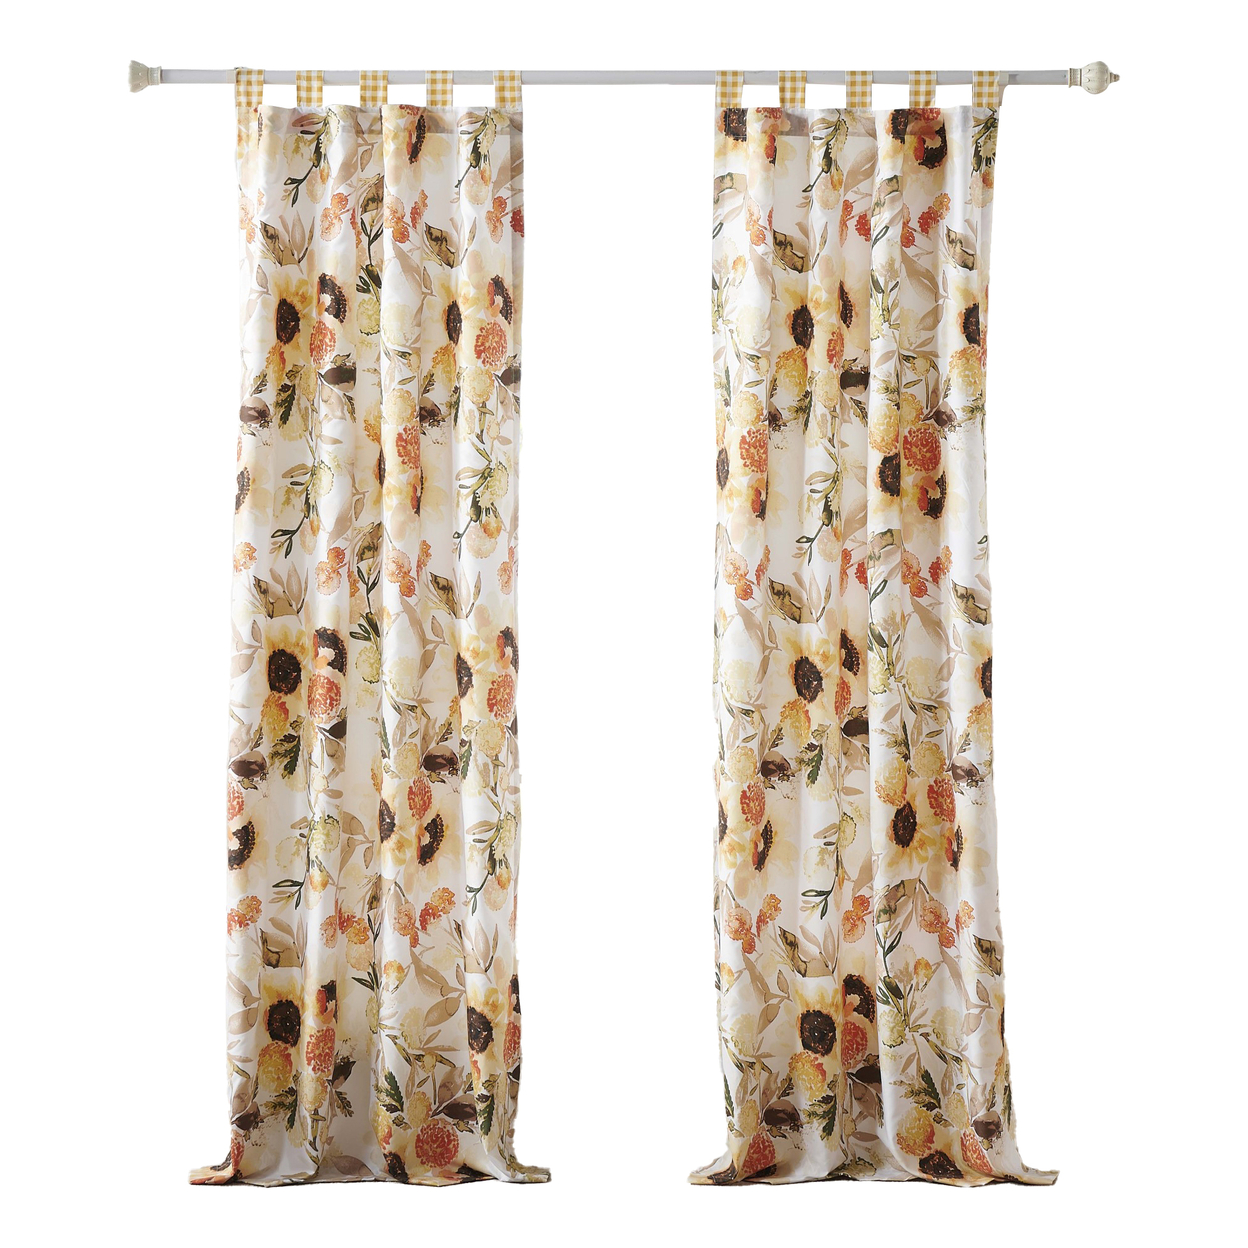 Kelsa Set Of 2 Panel Curtains With Watercolor Sunflowers, Ruffled, Gold